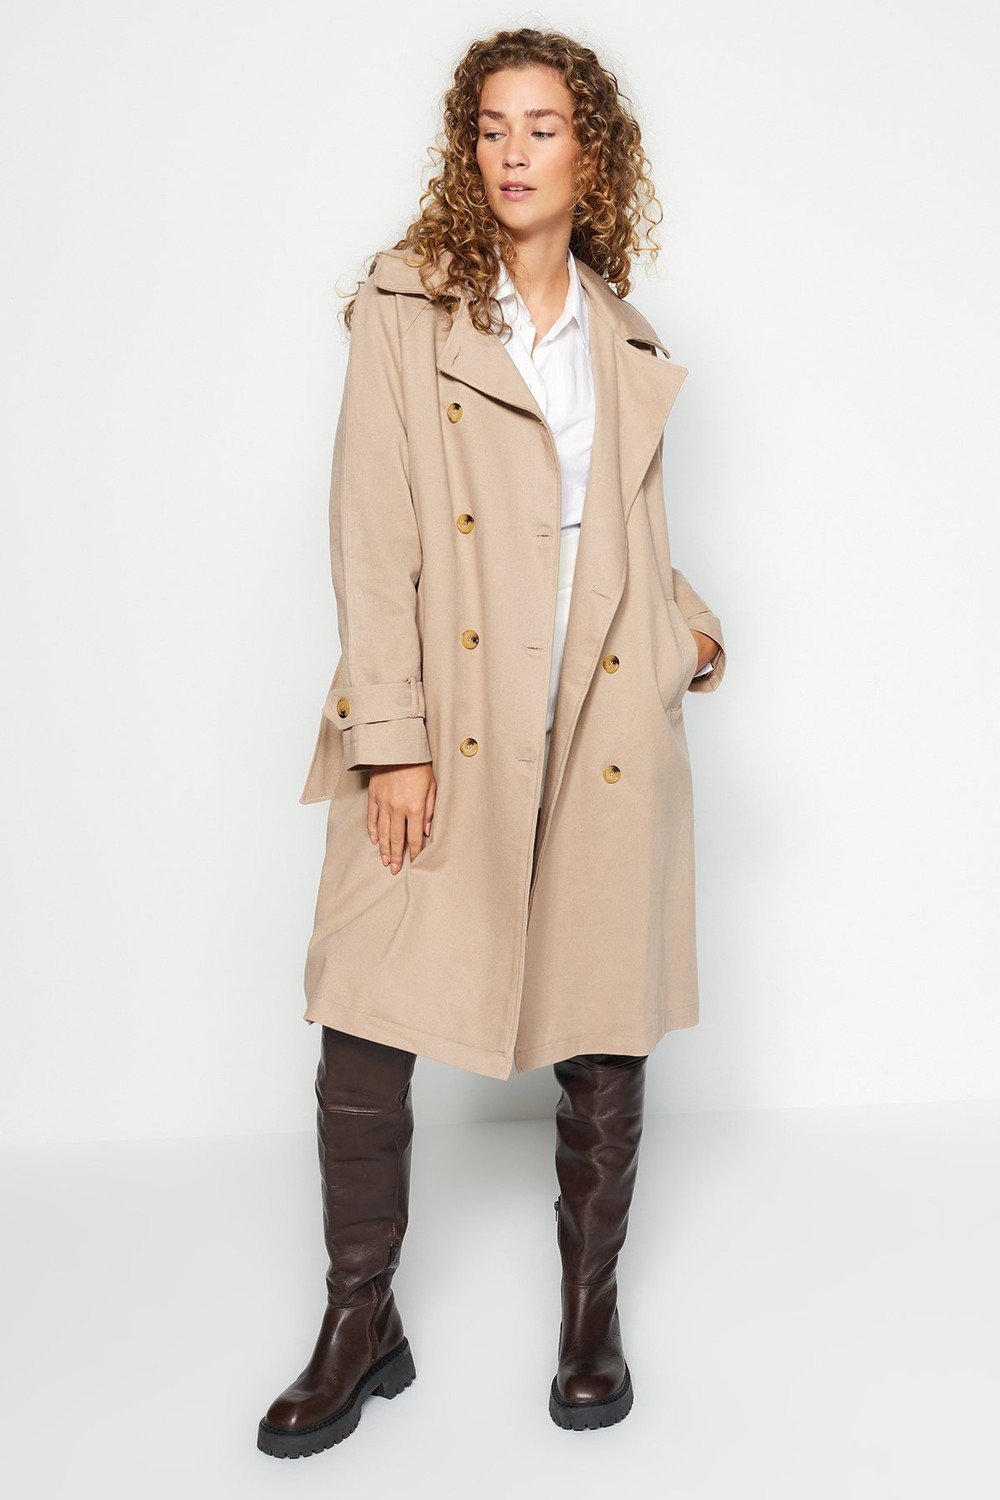 Trendyol Mink Oversize Hooded Trench Coat with Faux Leather Collar